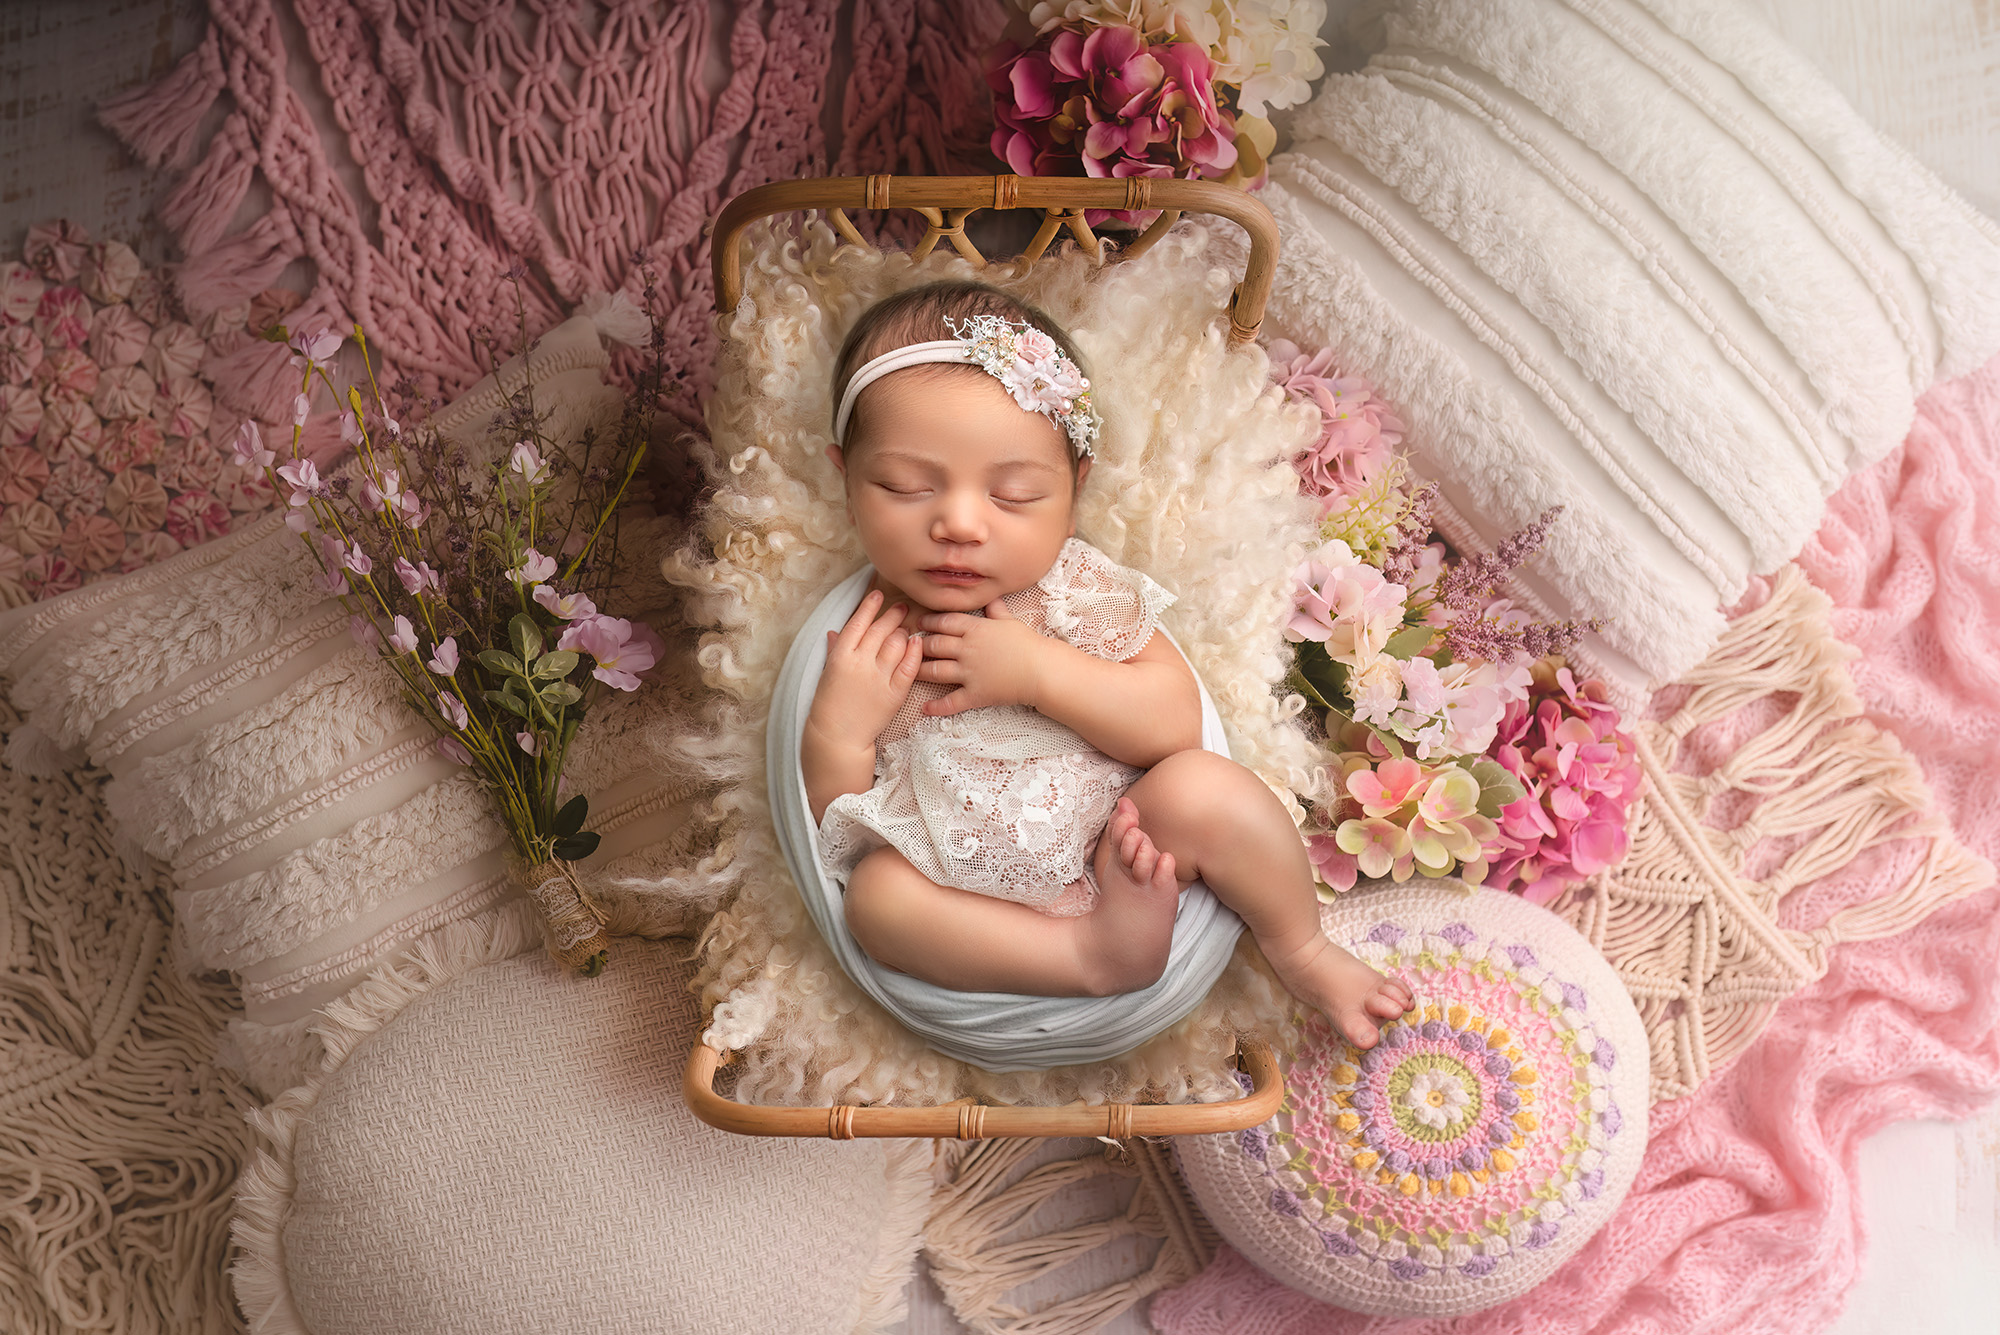 Newborn baby girl sleeping in a rattan bed, wrapped in lace, surrounded by pillows and crochet